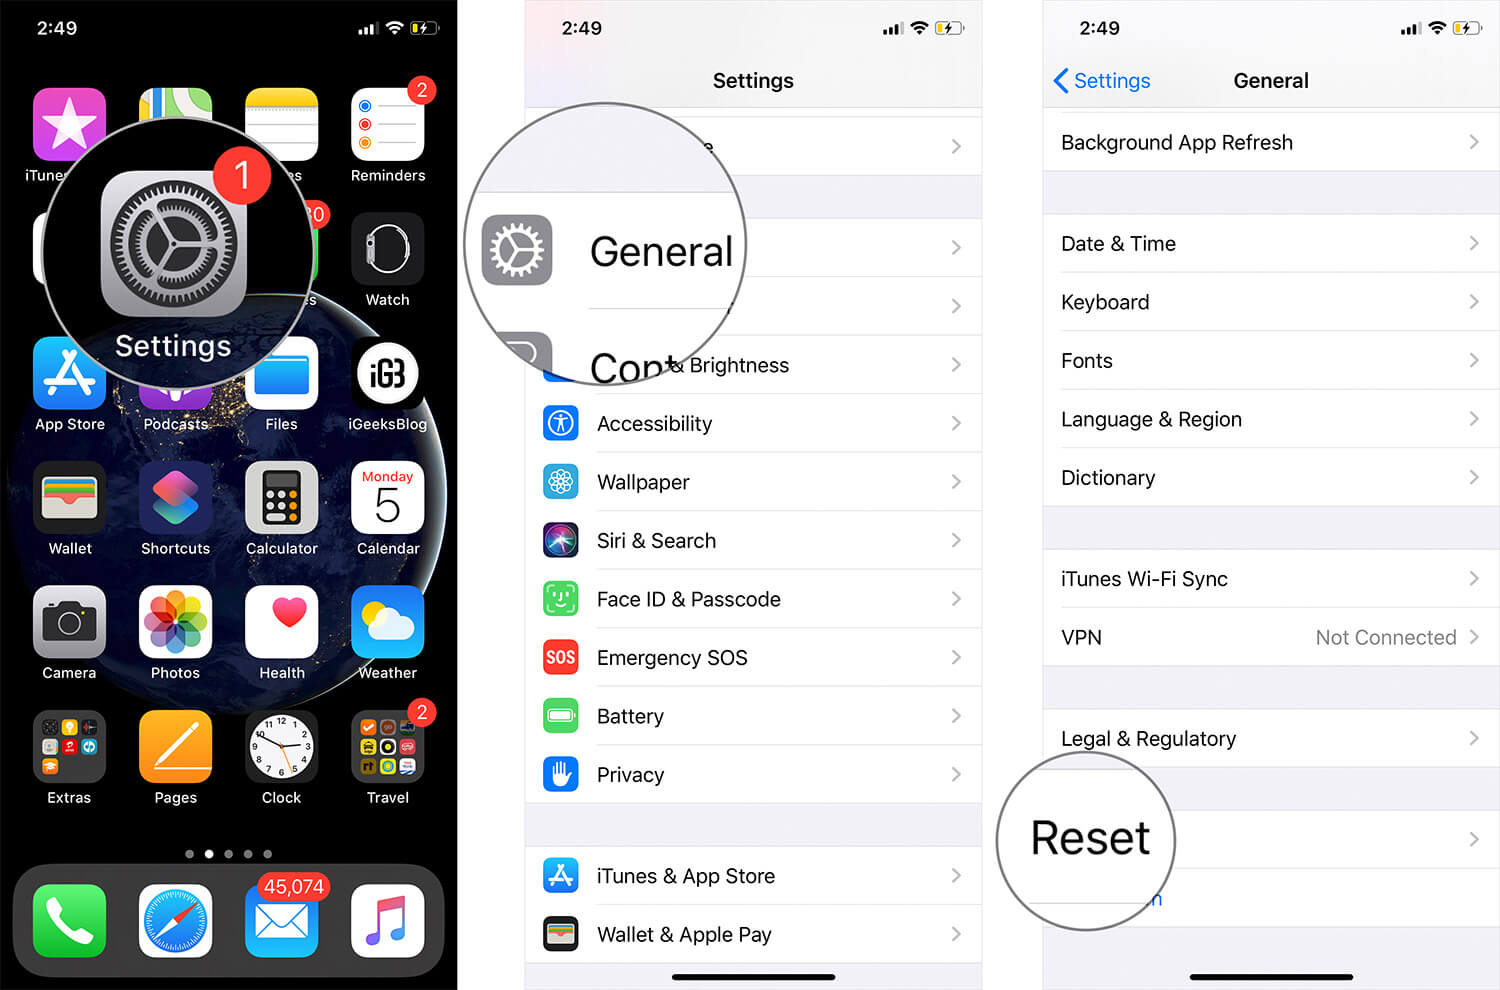 Tap on Settings then General then Reset on iPhone or iPad